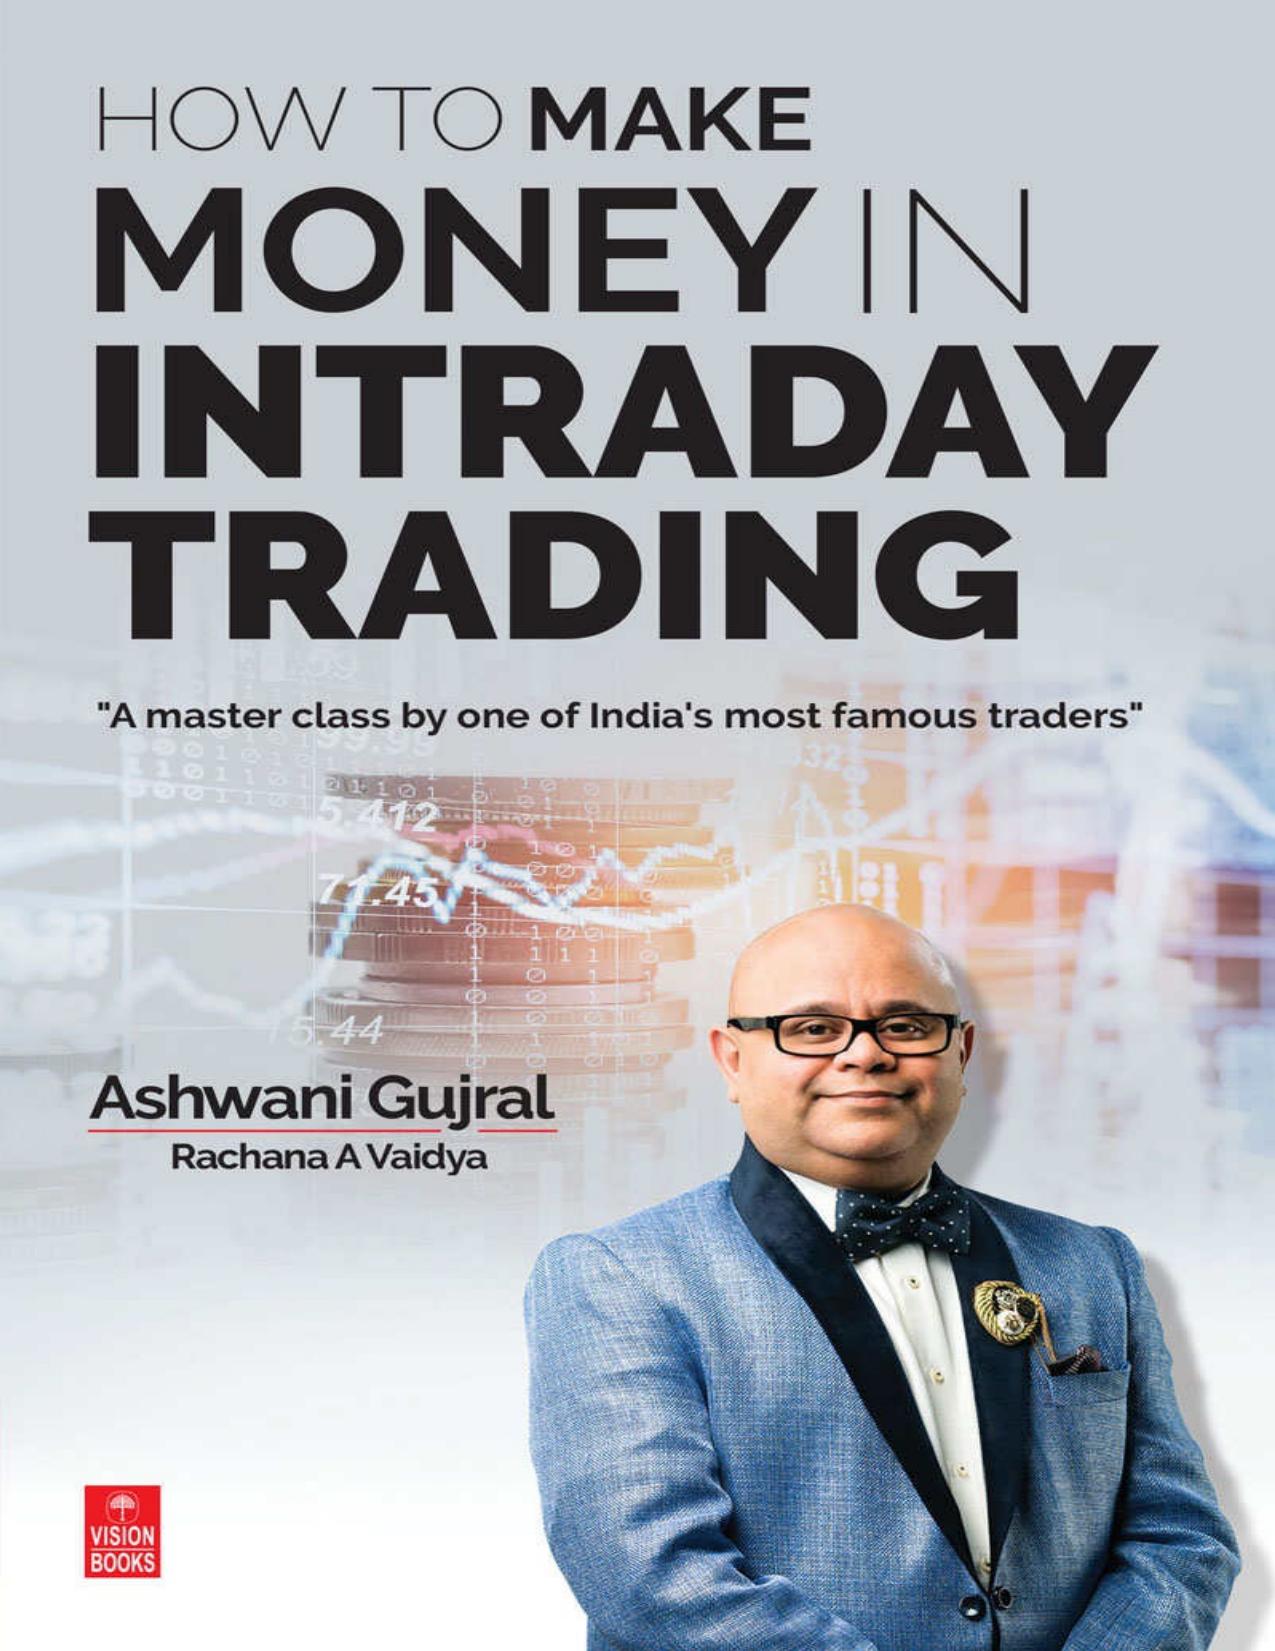 How to Make Money in Intraday Trading: A master class by one of India's most famous traders